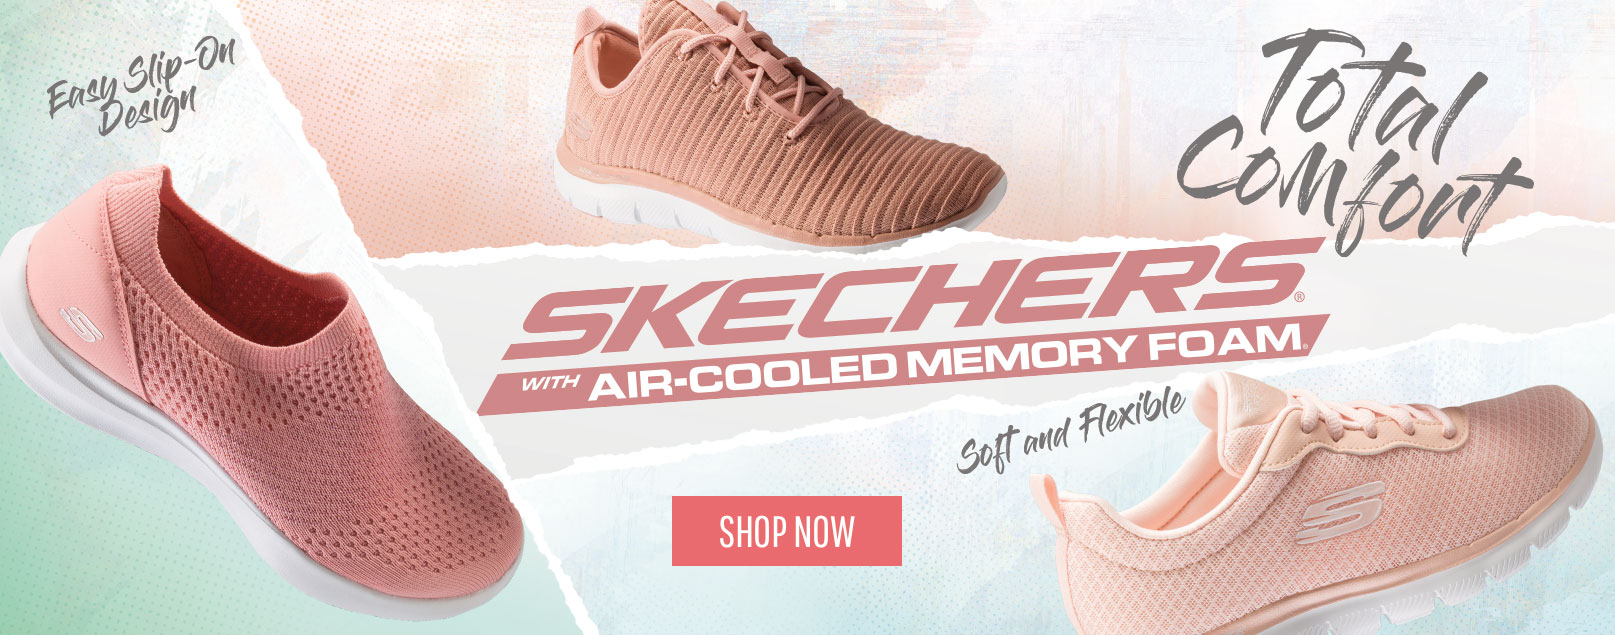 Shop for SKECHERS Shoes, Sneakers, Sport, Performance, Sandals and ...